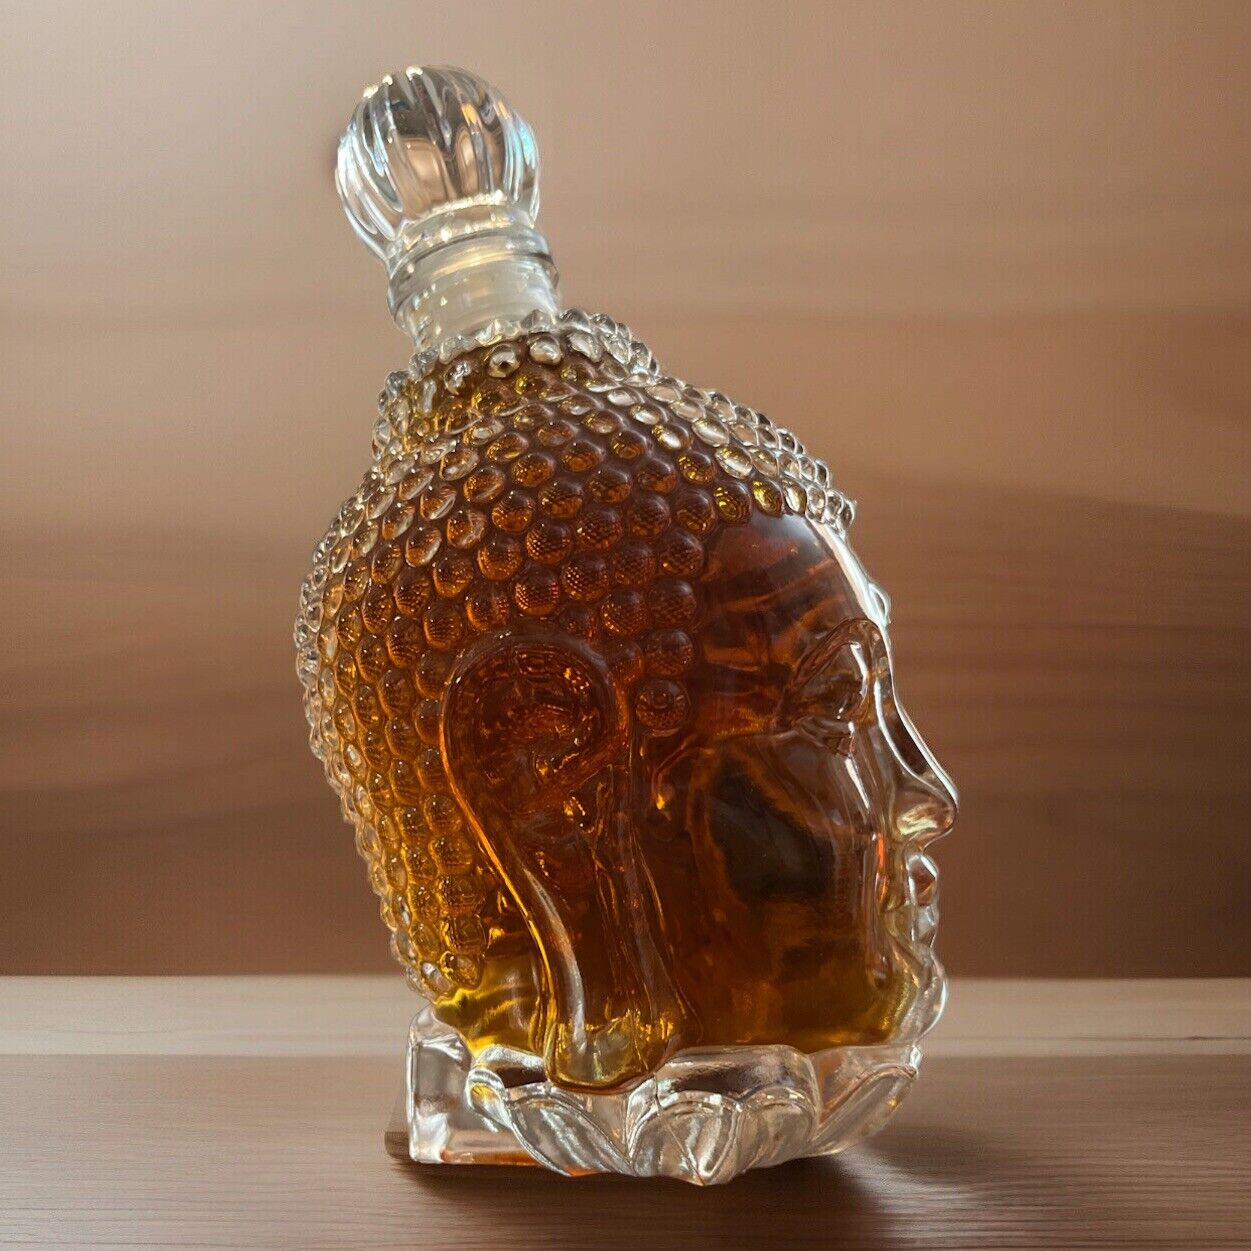 Glass Decanter with Airtight Stopper, Liquor Decanter with Unique Buddha Shaped 